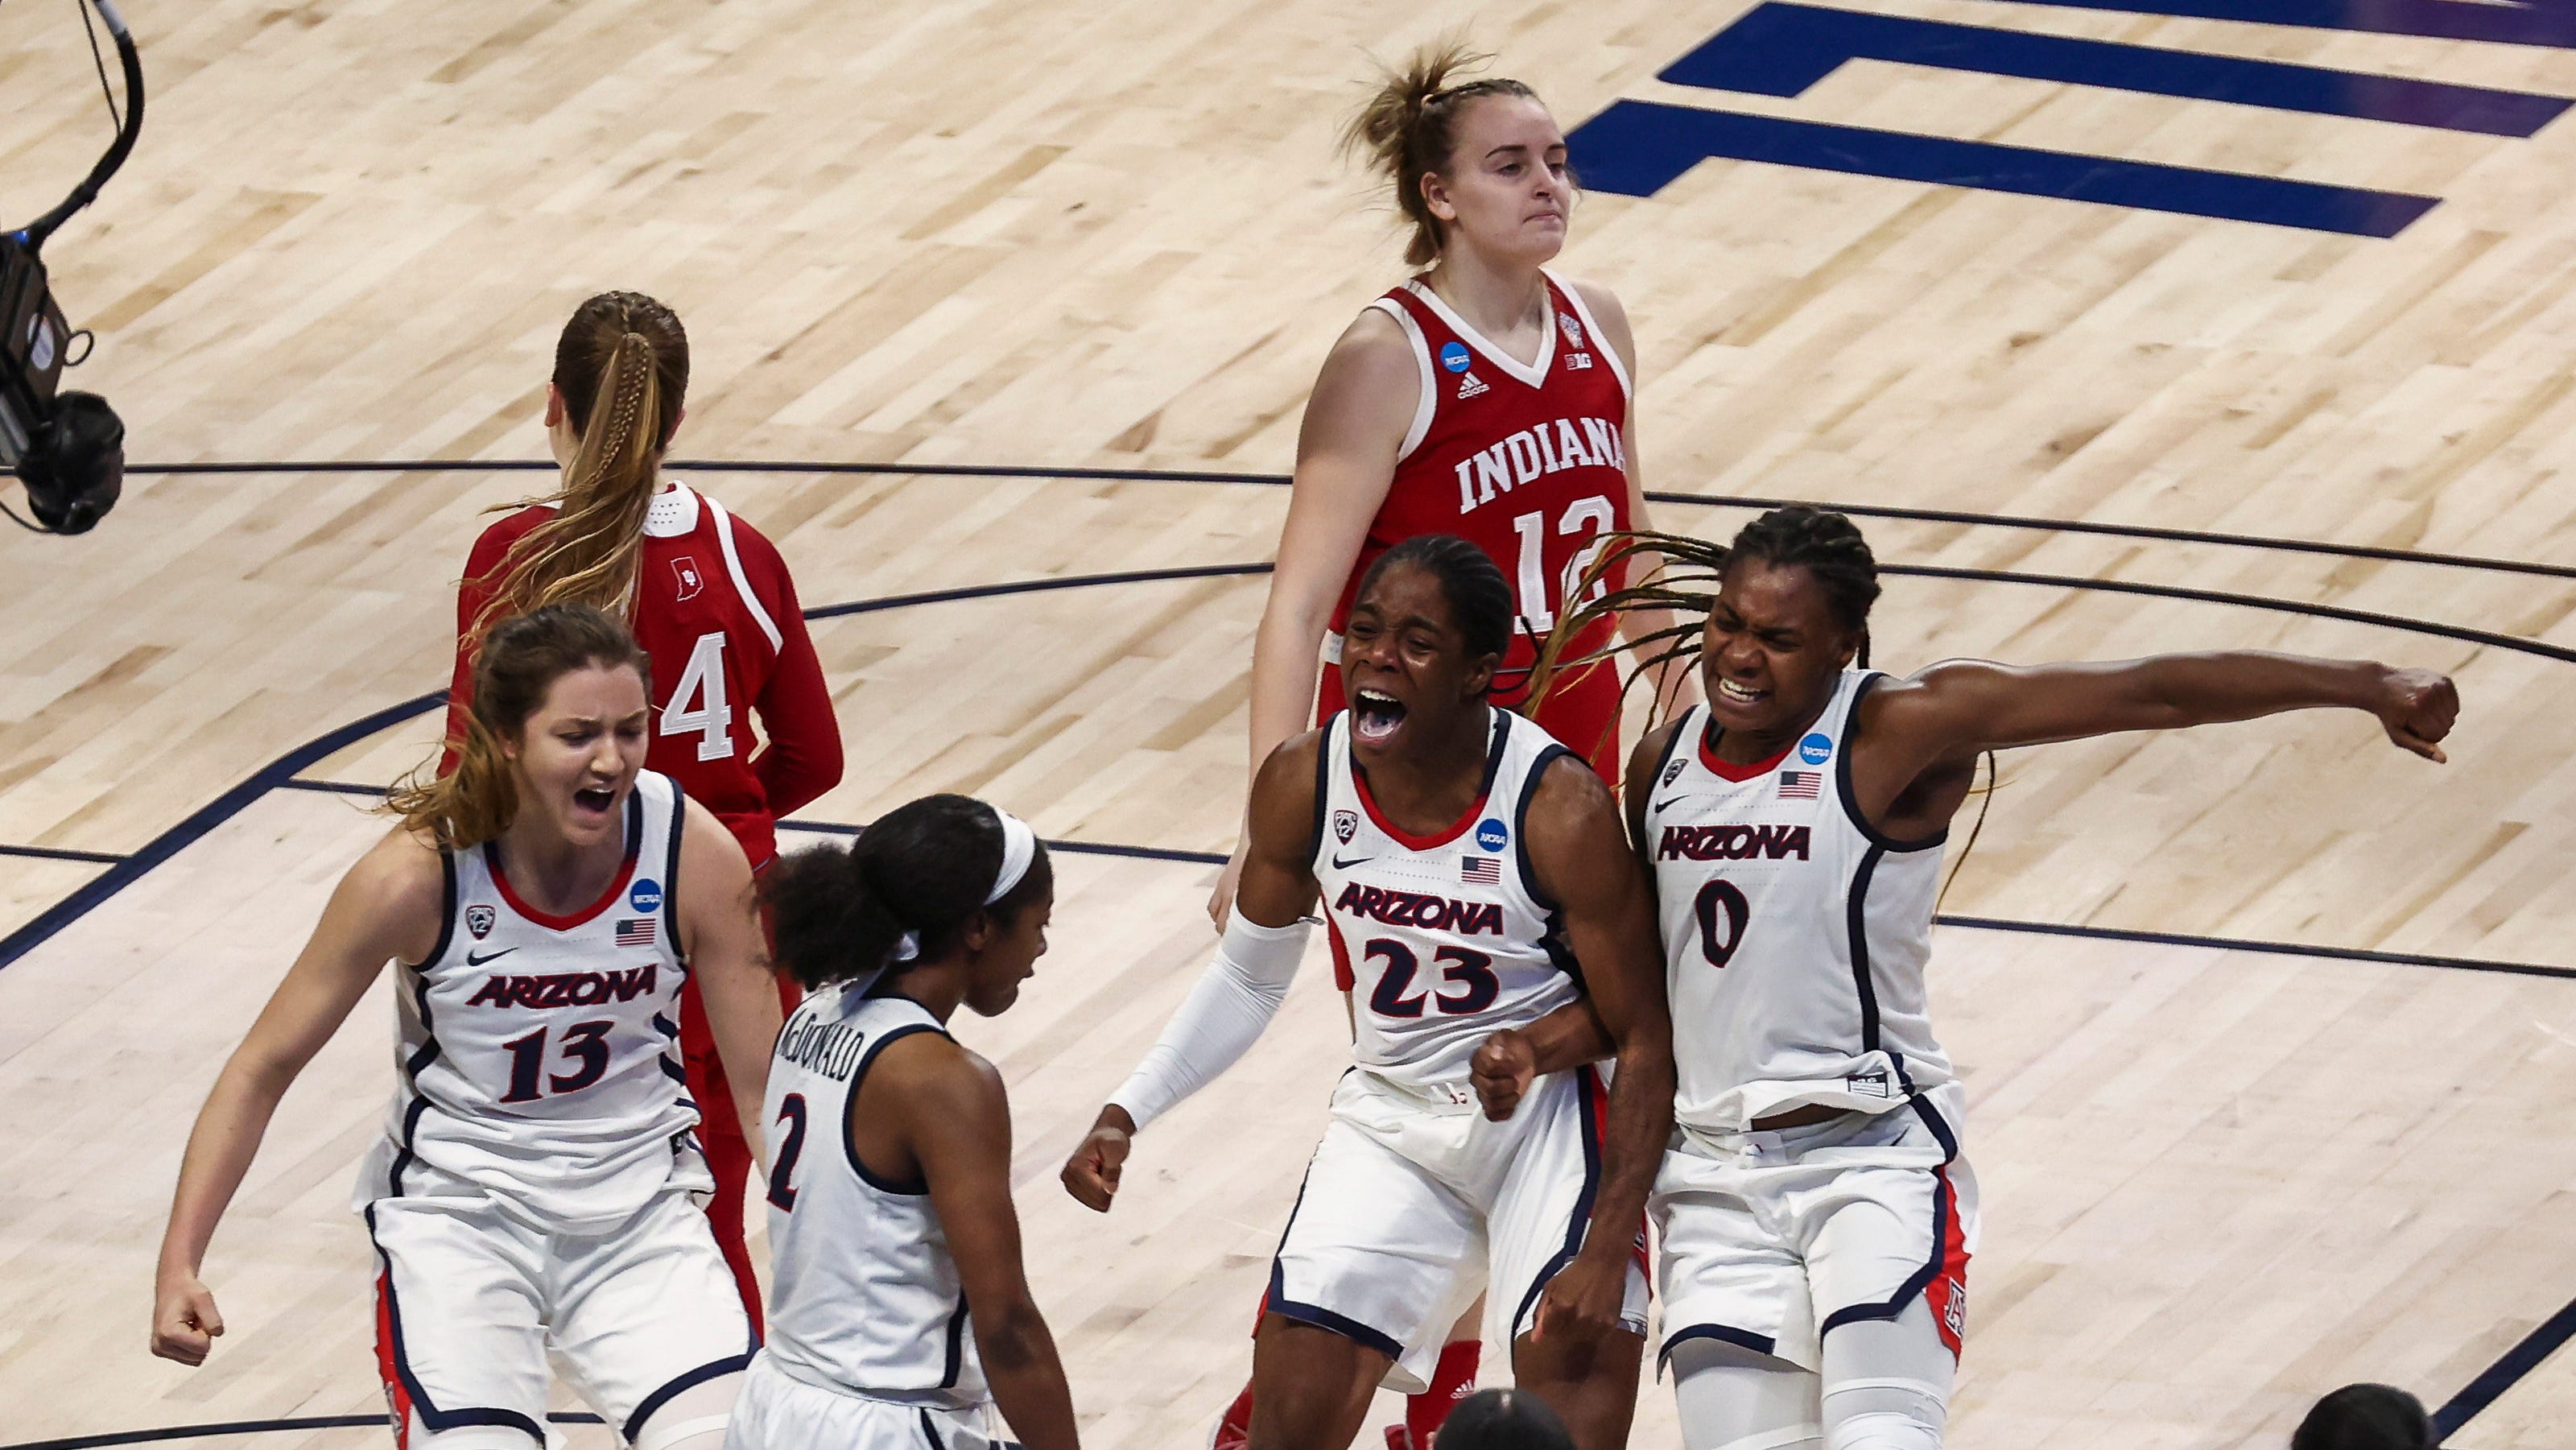 Here's what to watch for at Women's Final Four